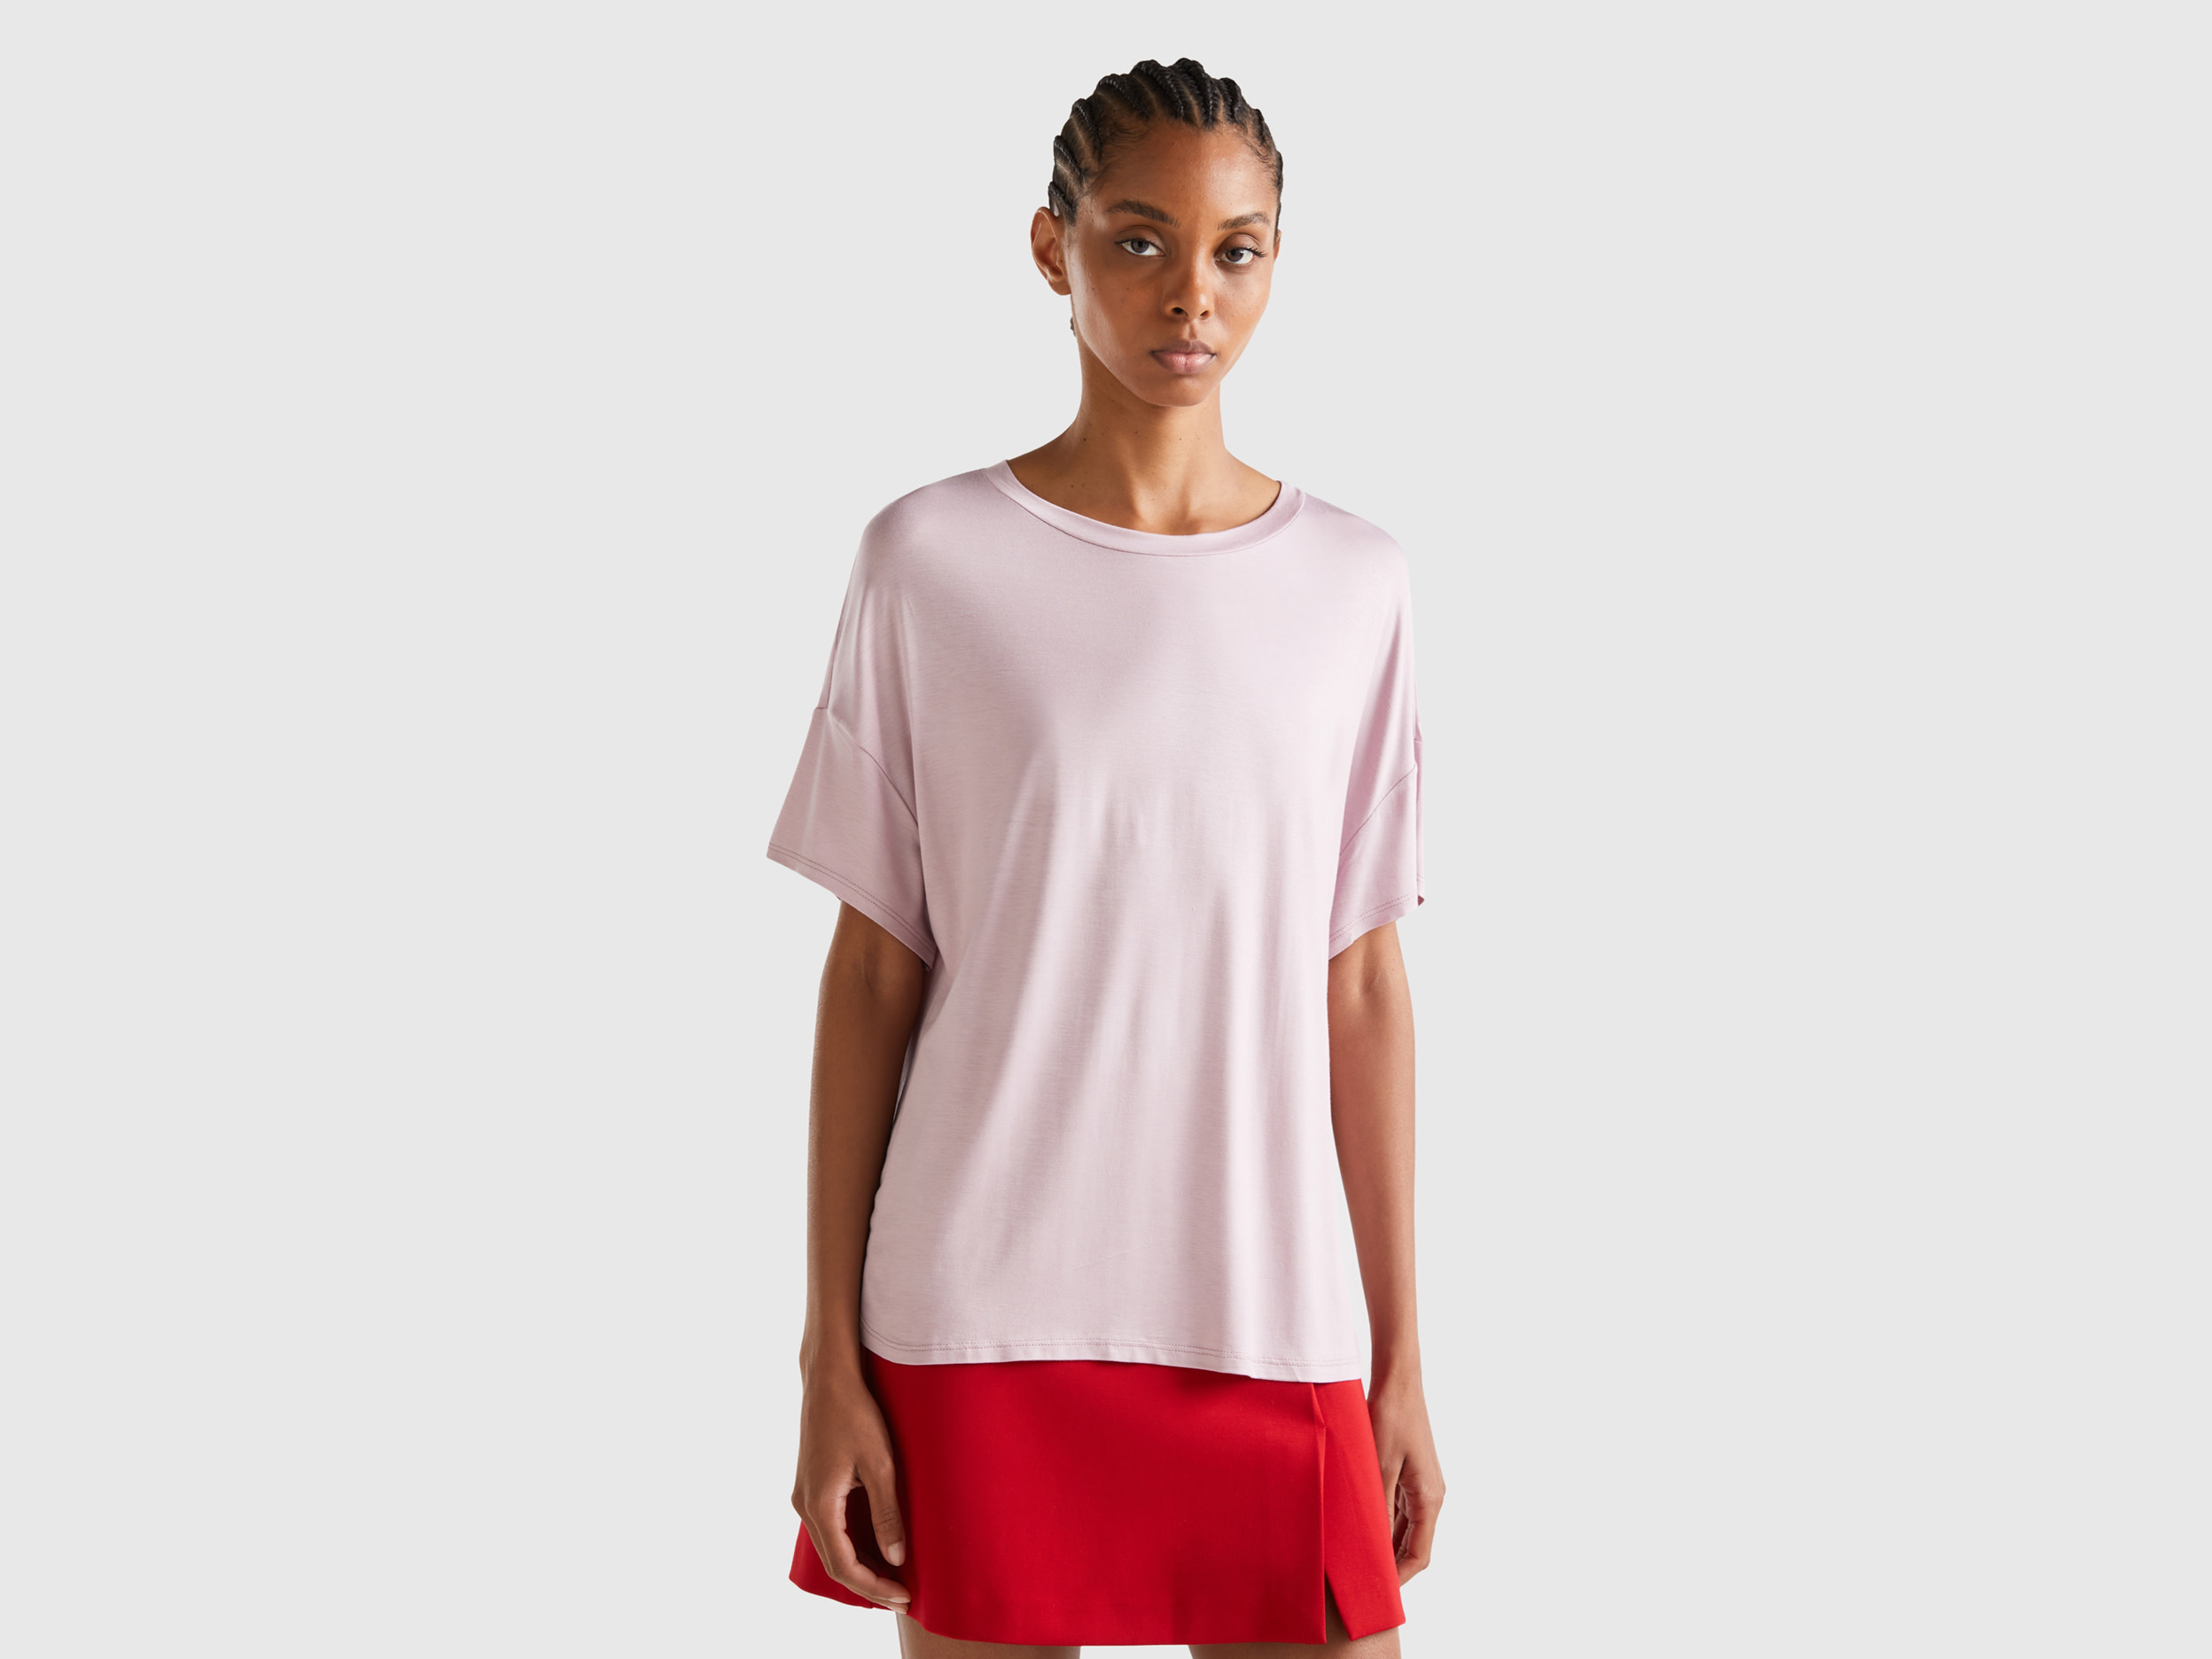 Benetton, T-shirt In Sustainable Stretch Viscose, size M, Soft Pink, Women